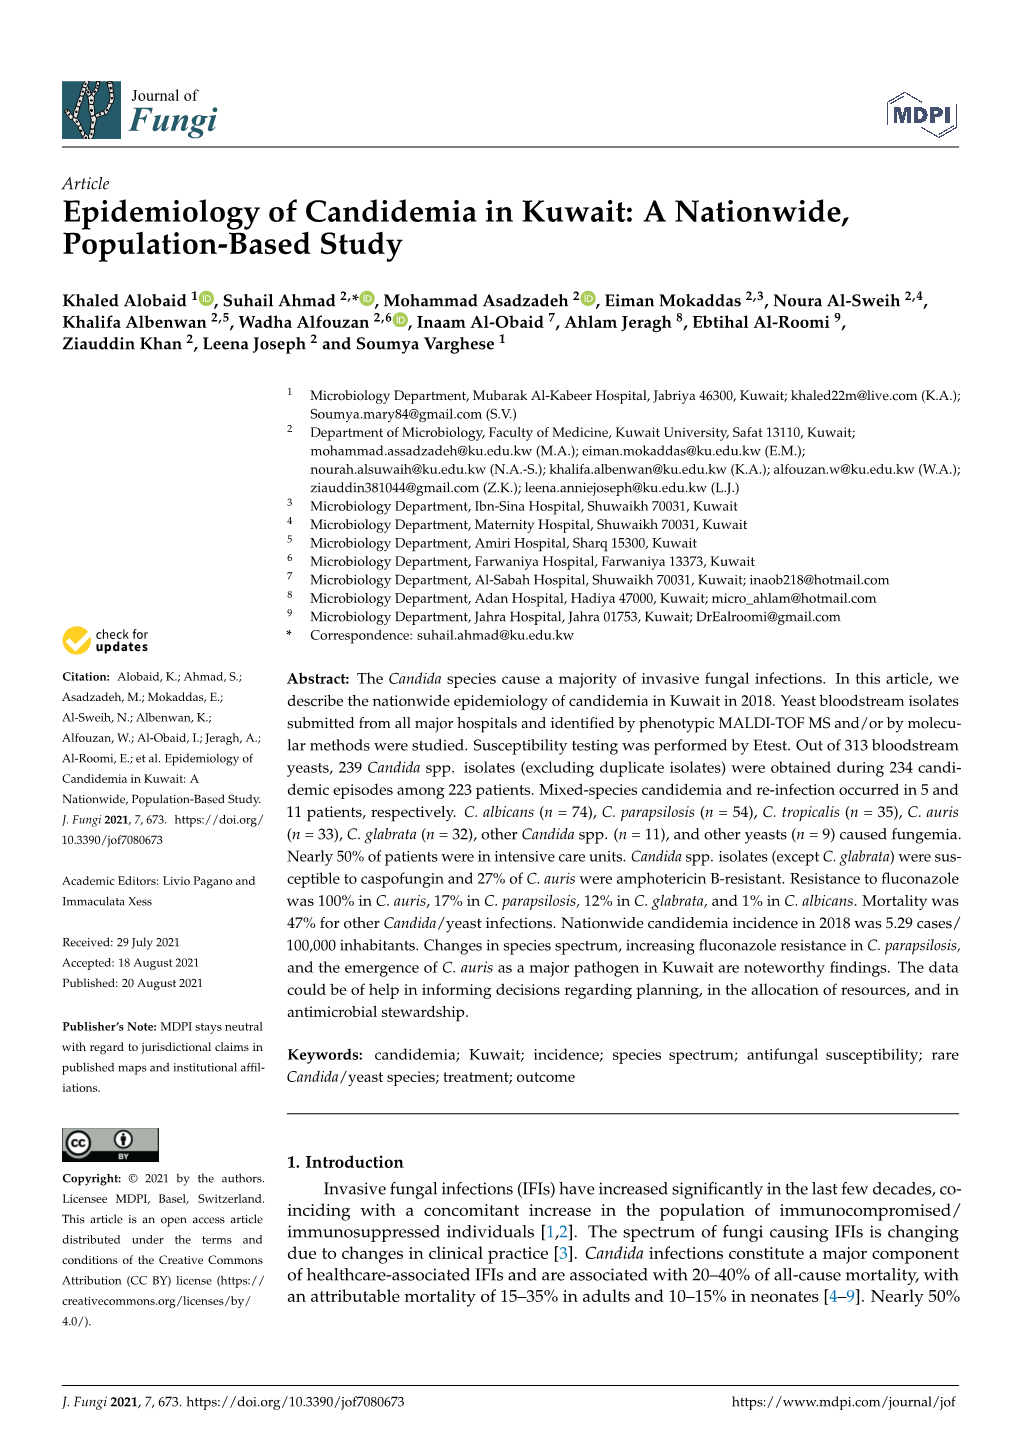 Epidemiology of Candidemia in Kuwait: a Nationwide, Population-Based Study